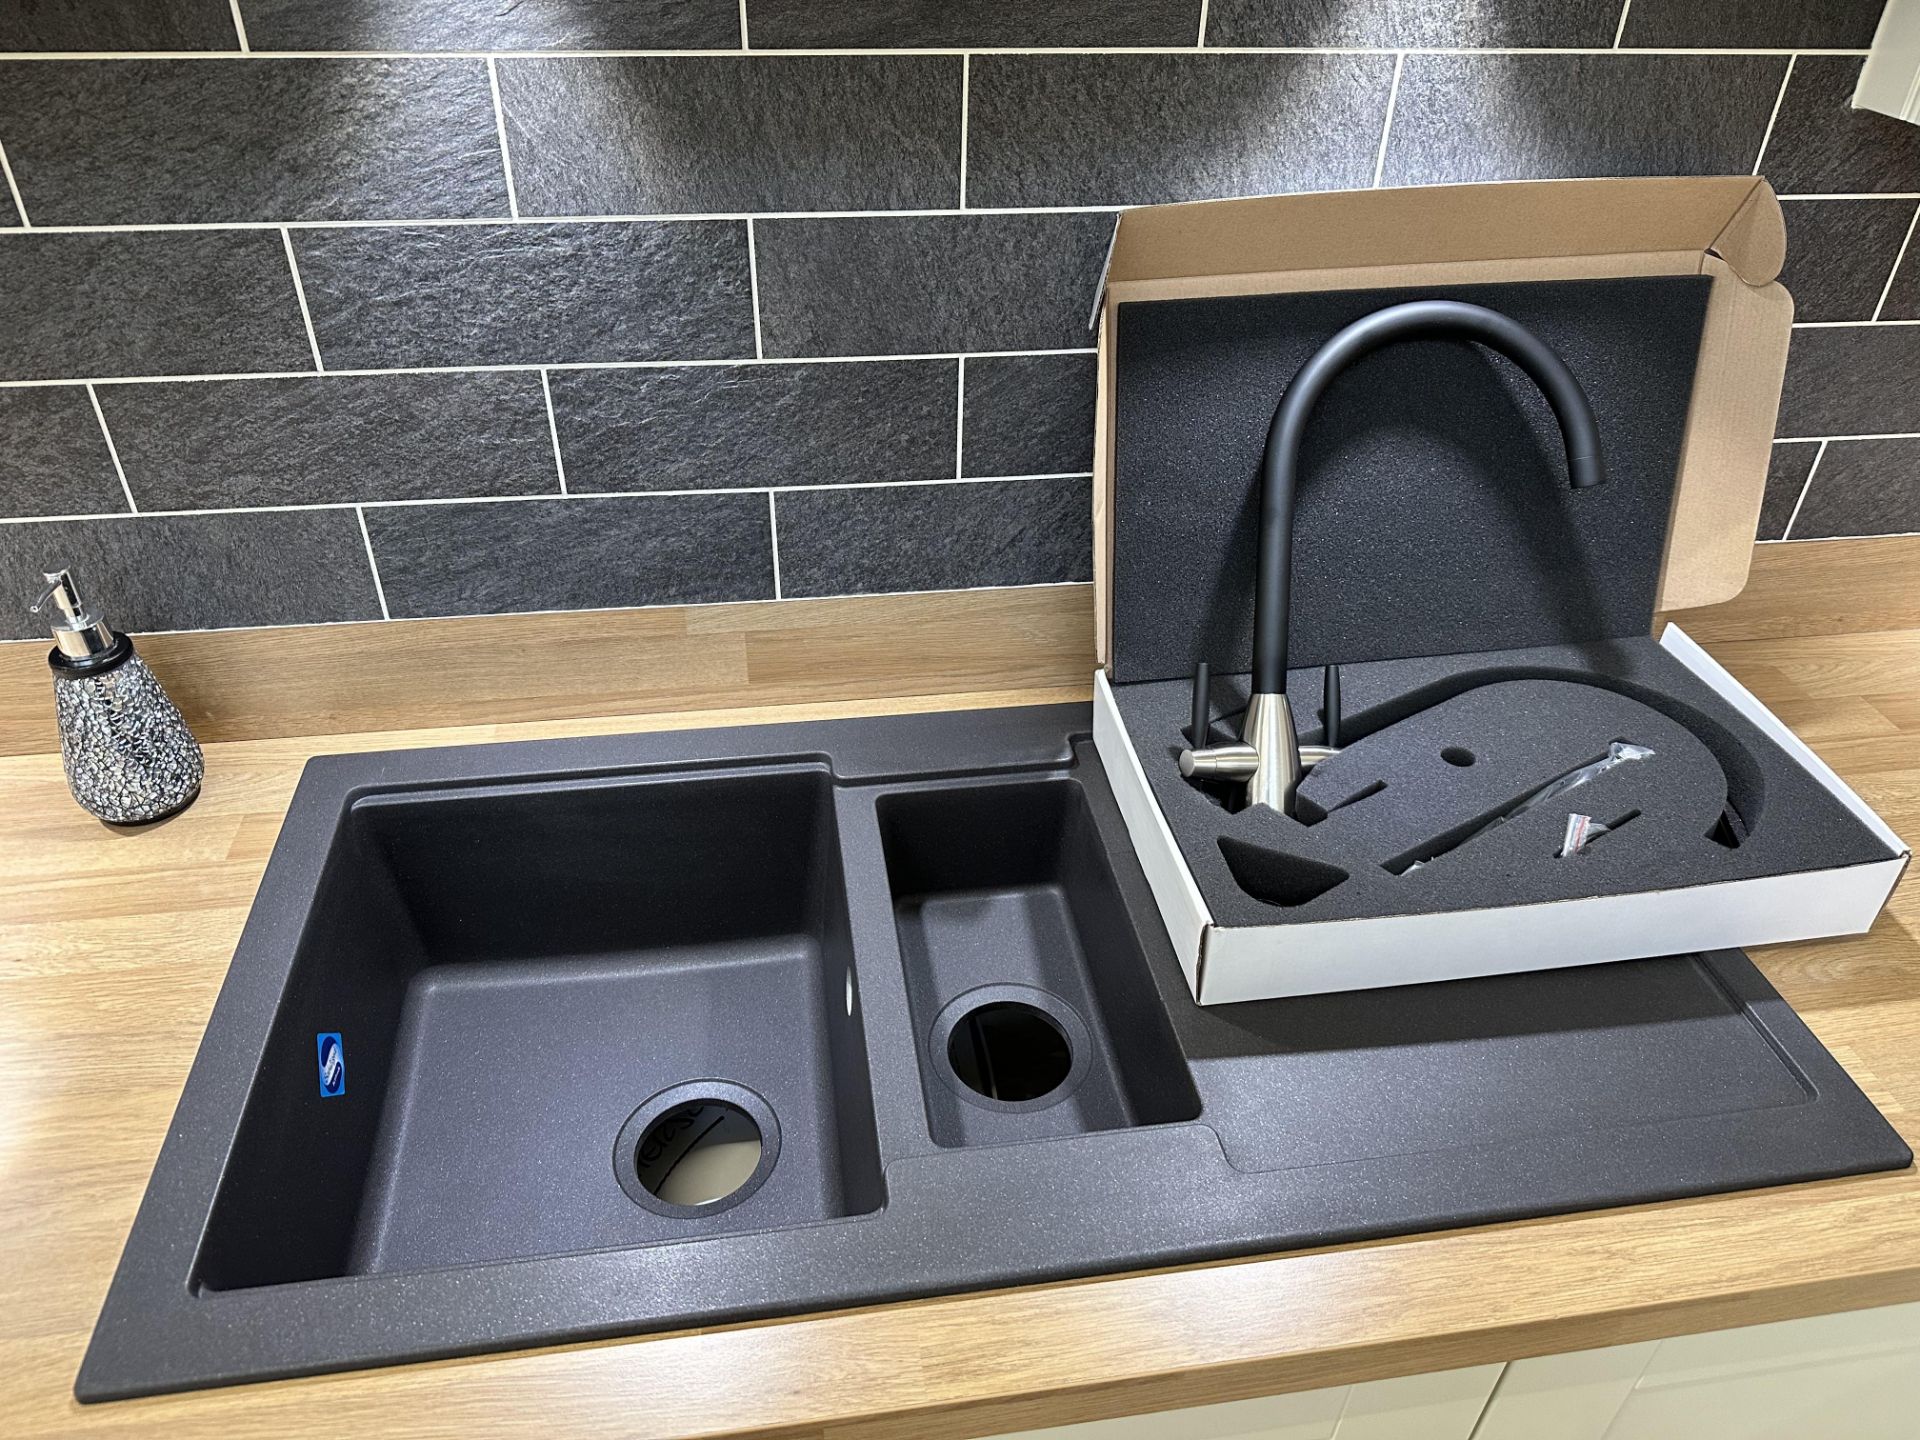 Omega English Rose Kitchen Display w/ Hob, Extractor, Sink & Tap - RRP£11,866 - See Pics & Desc - Image 20 of 25